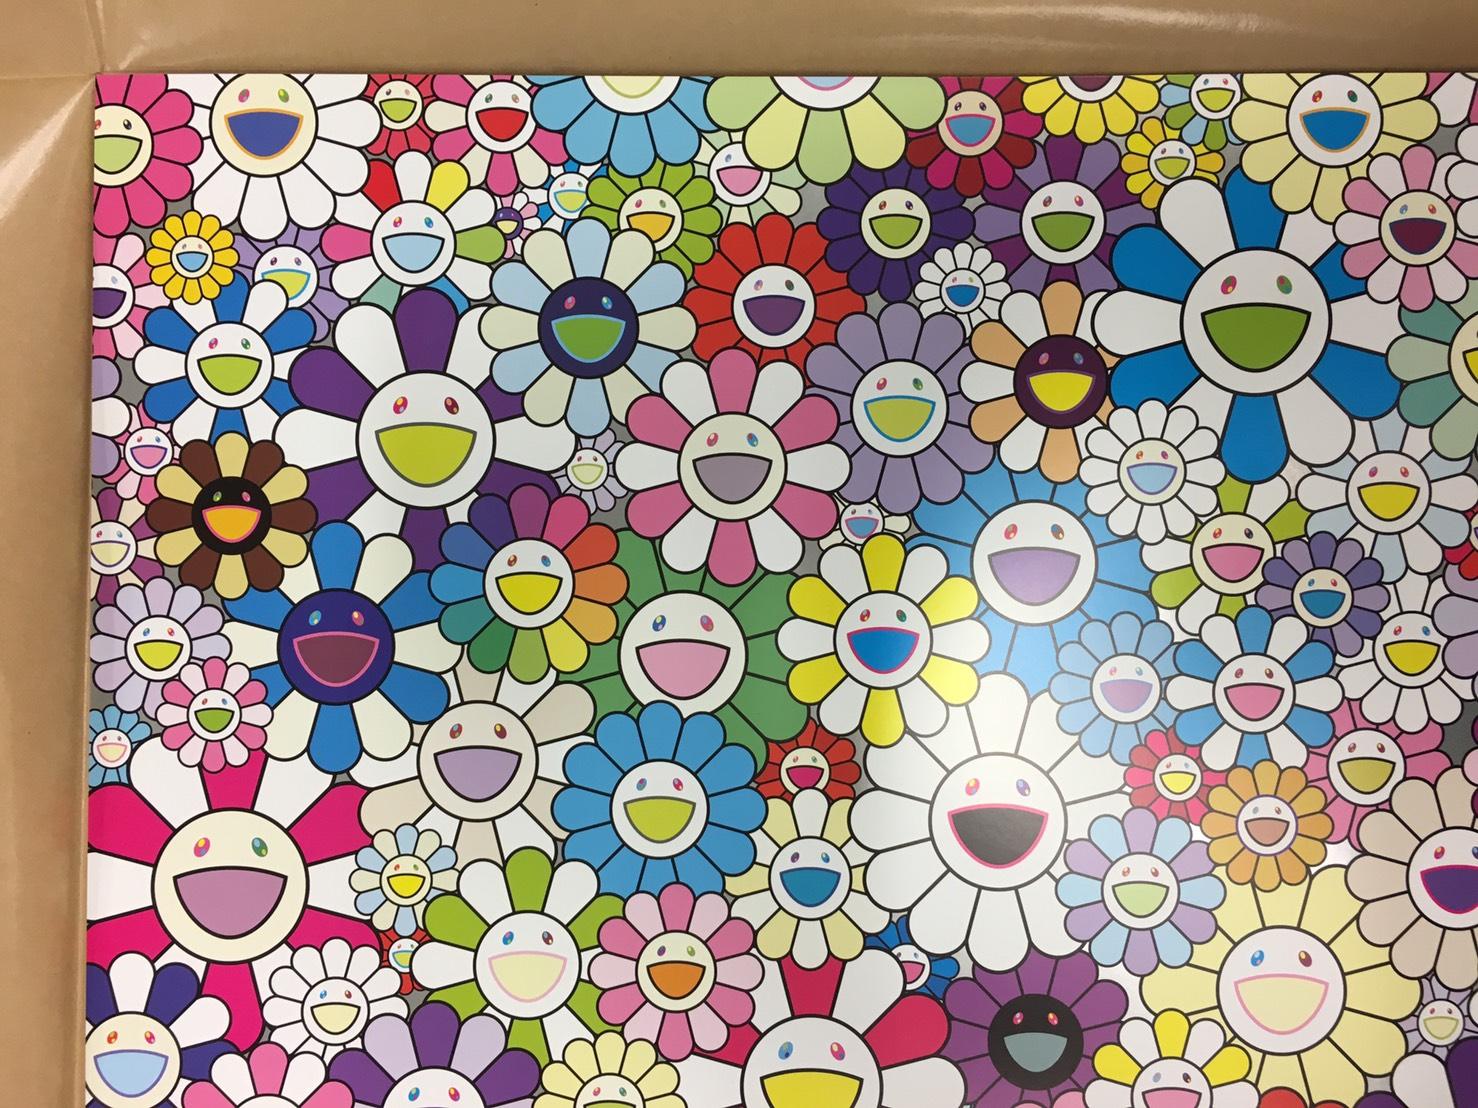 The Nether World, 2018 by Takashi Murakami
Offset print, numbered and signed by the artist
23 3/5 × 23 3/5 in
60 × 60 cm
Edition  212/300


Takashi Murakami is best known for his contemporary combination of fine art and pop culture. He uses